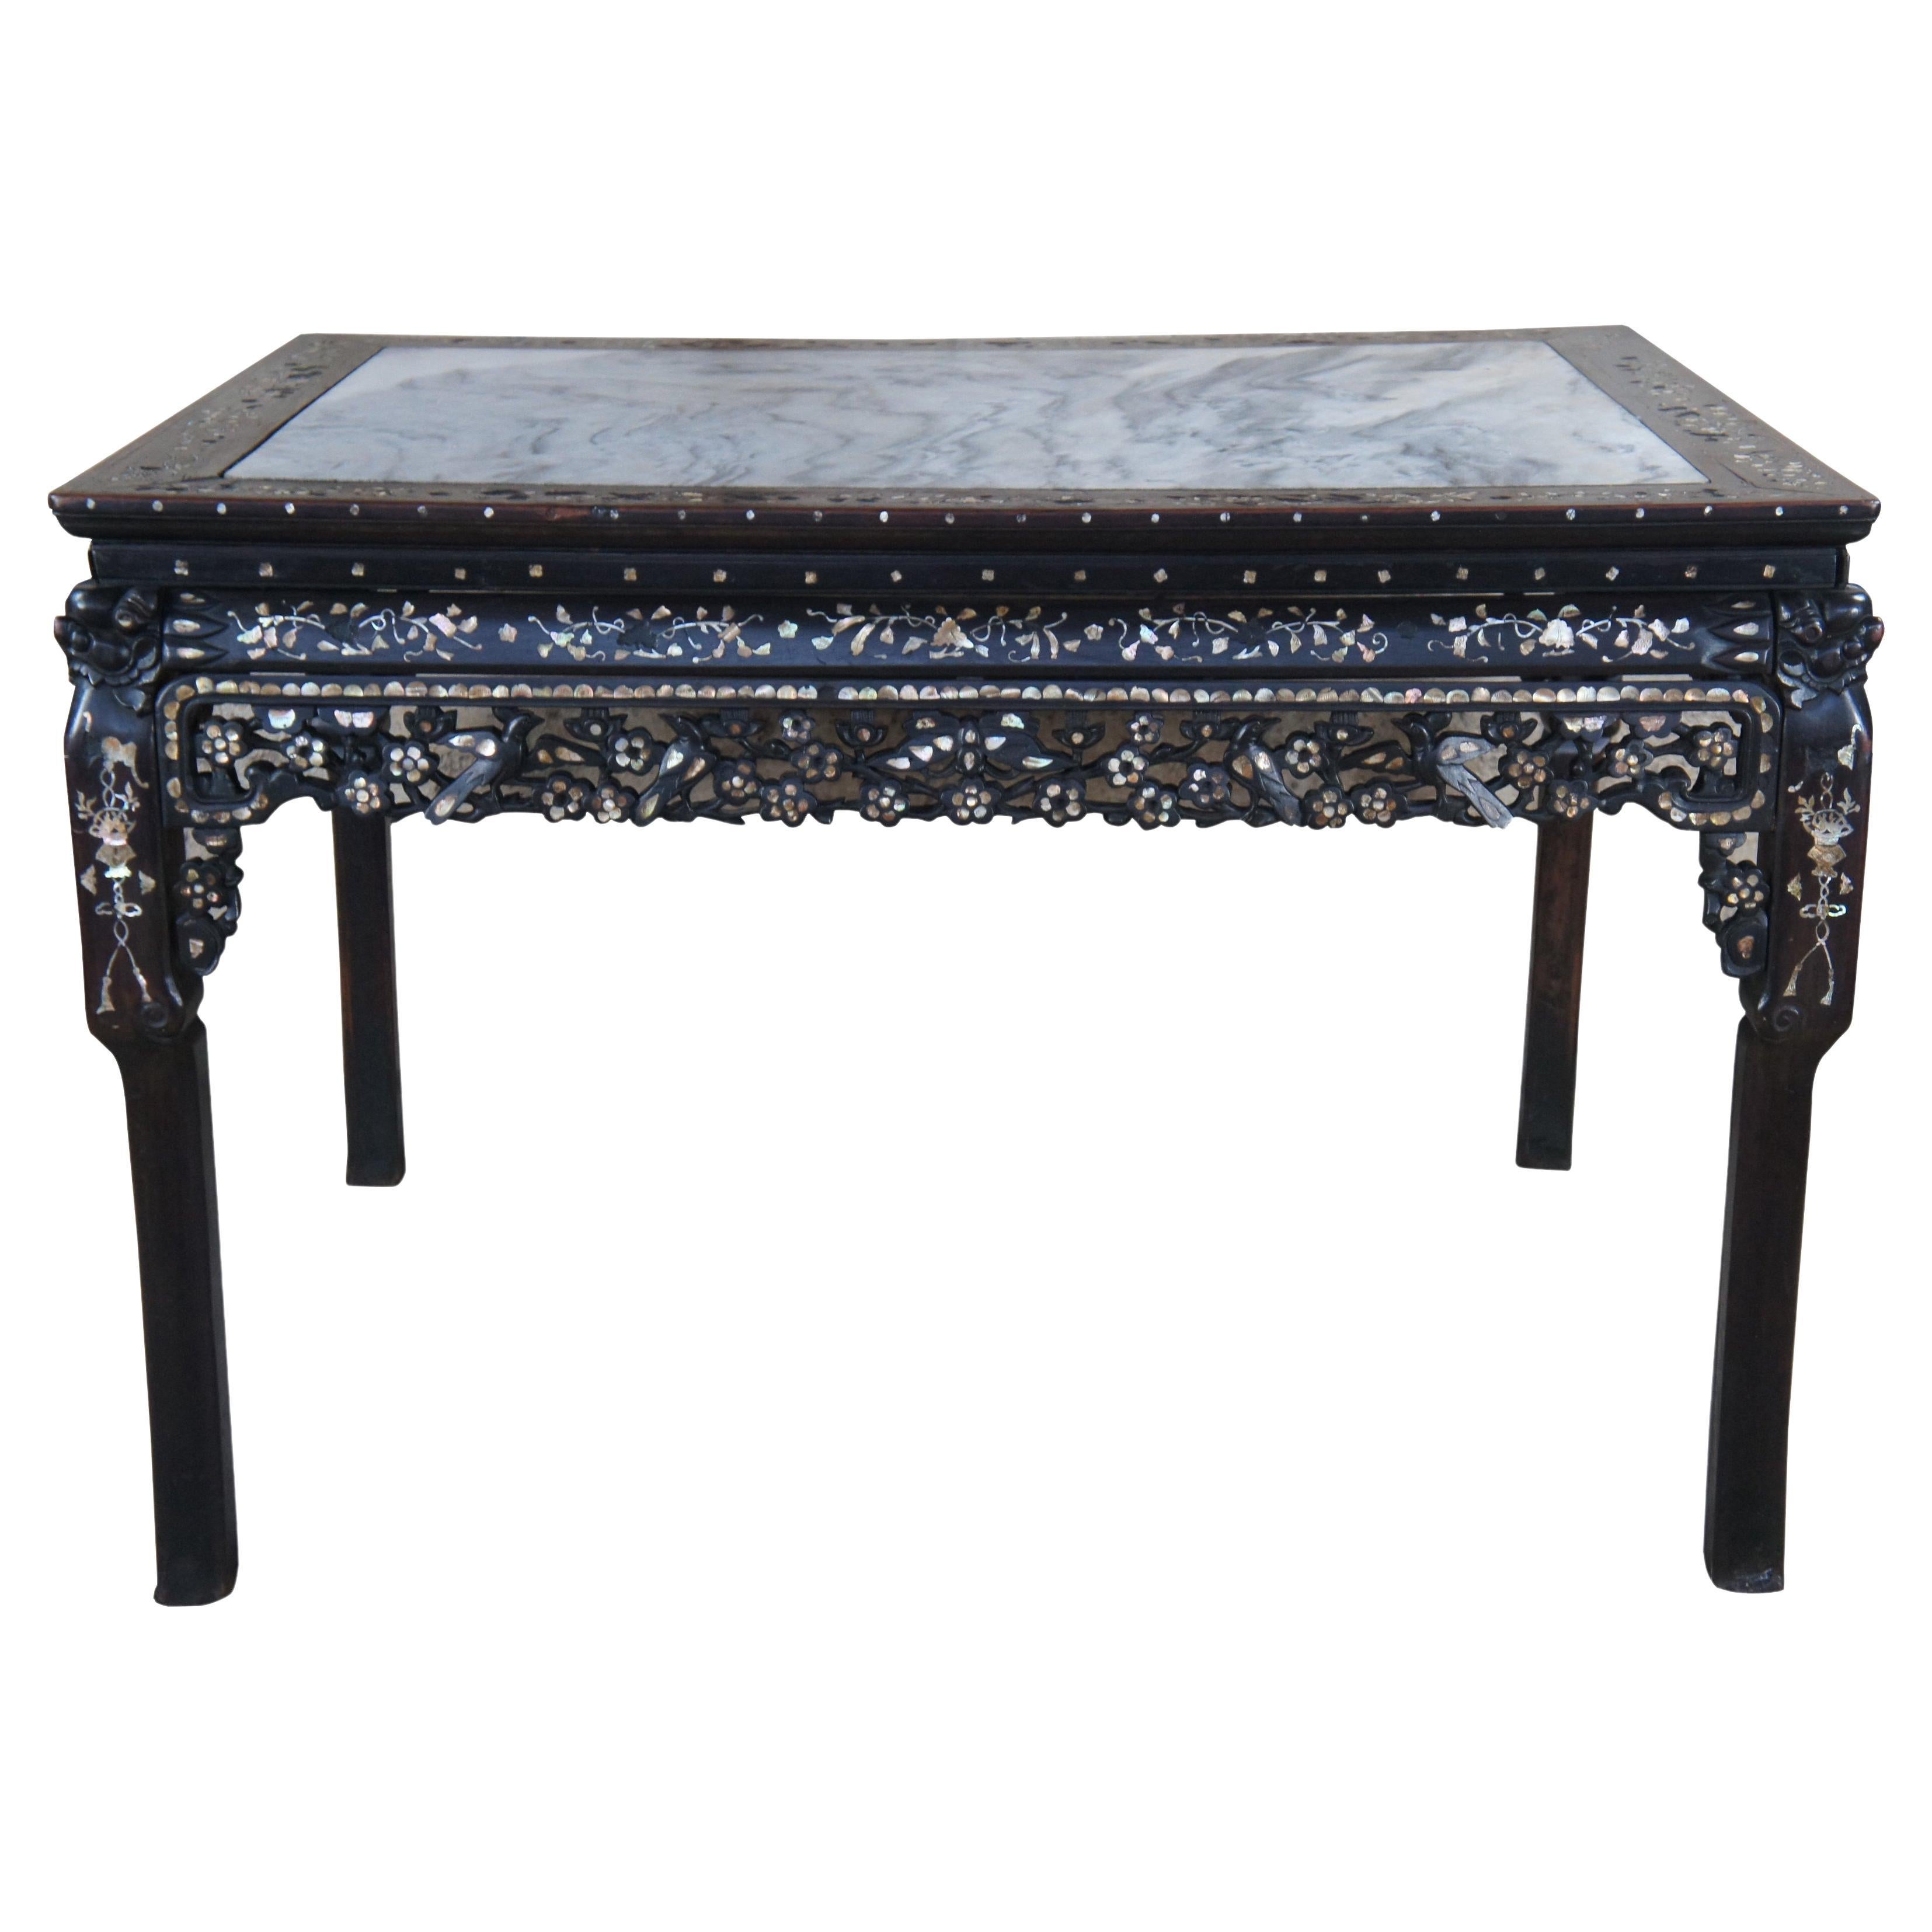 An impressive antique 19th century Mother or Pearly inlaid console, game, dining or center table. A rectangular form made from rosewood with mortise and tenon construction featuring inset gray marble top over a mother-of-pearl inlaid and pierced